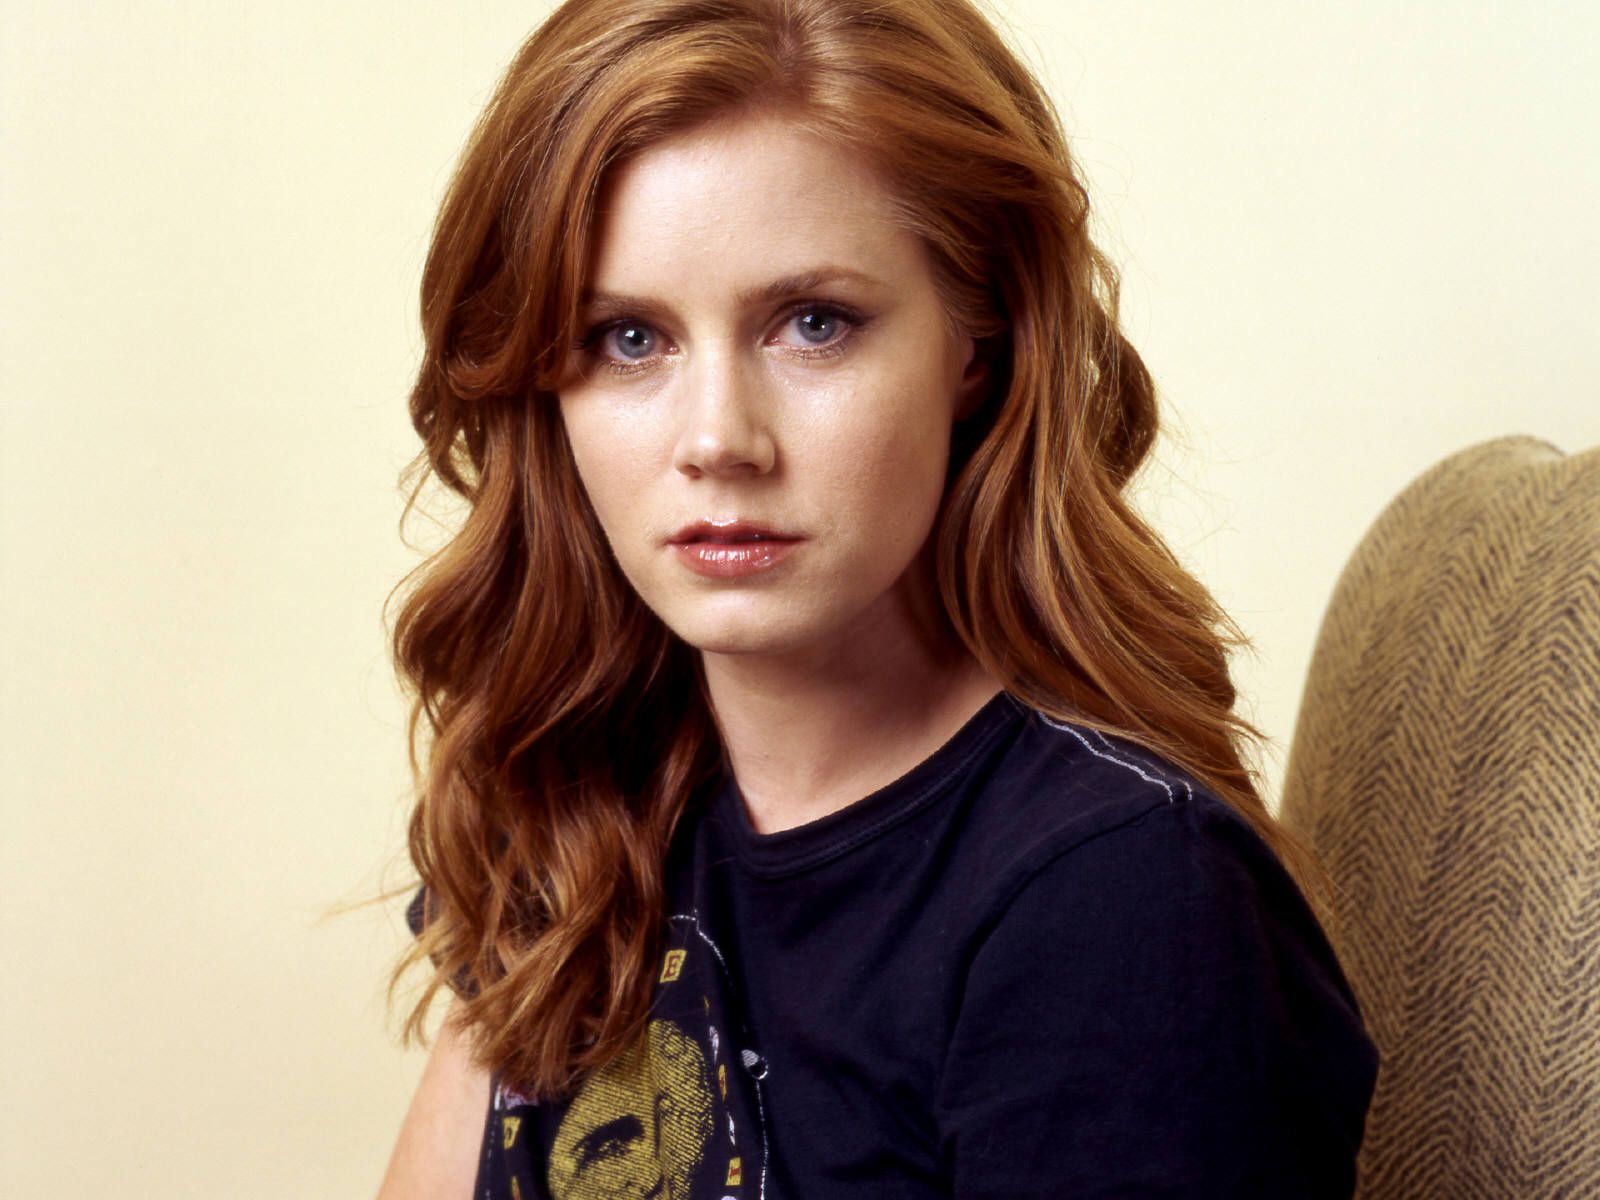 Hottest redhead actresses